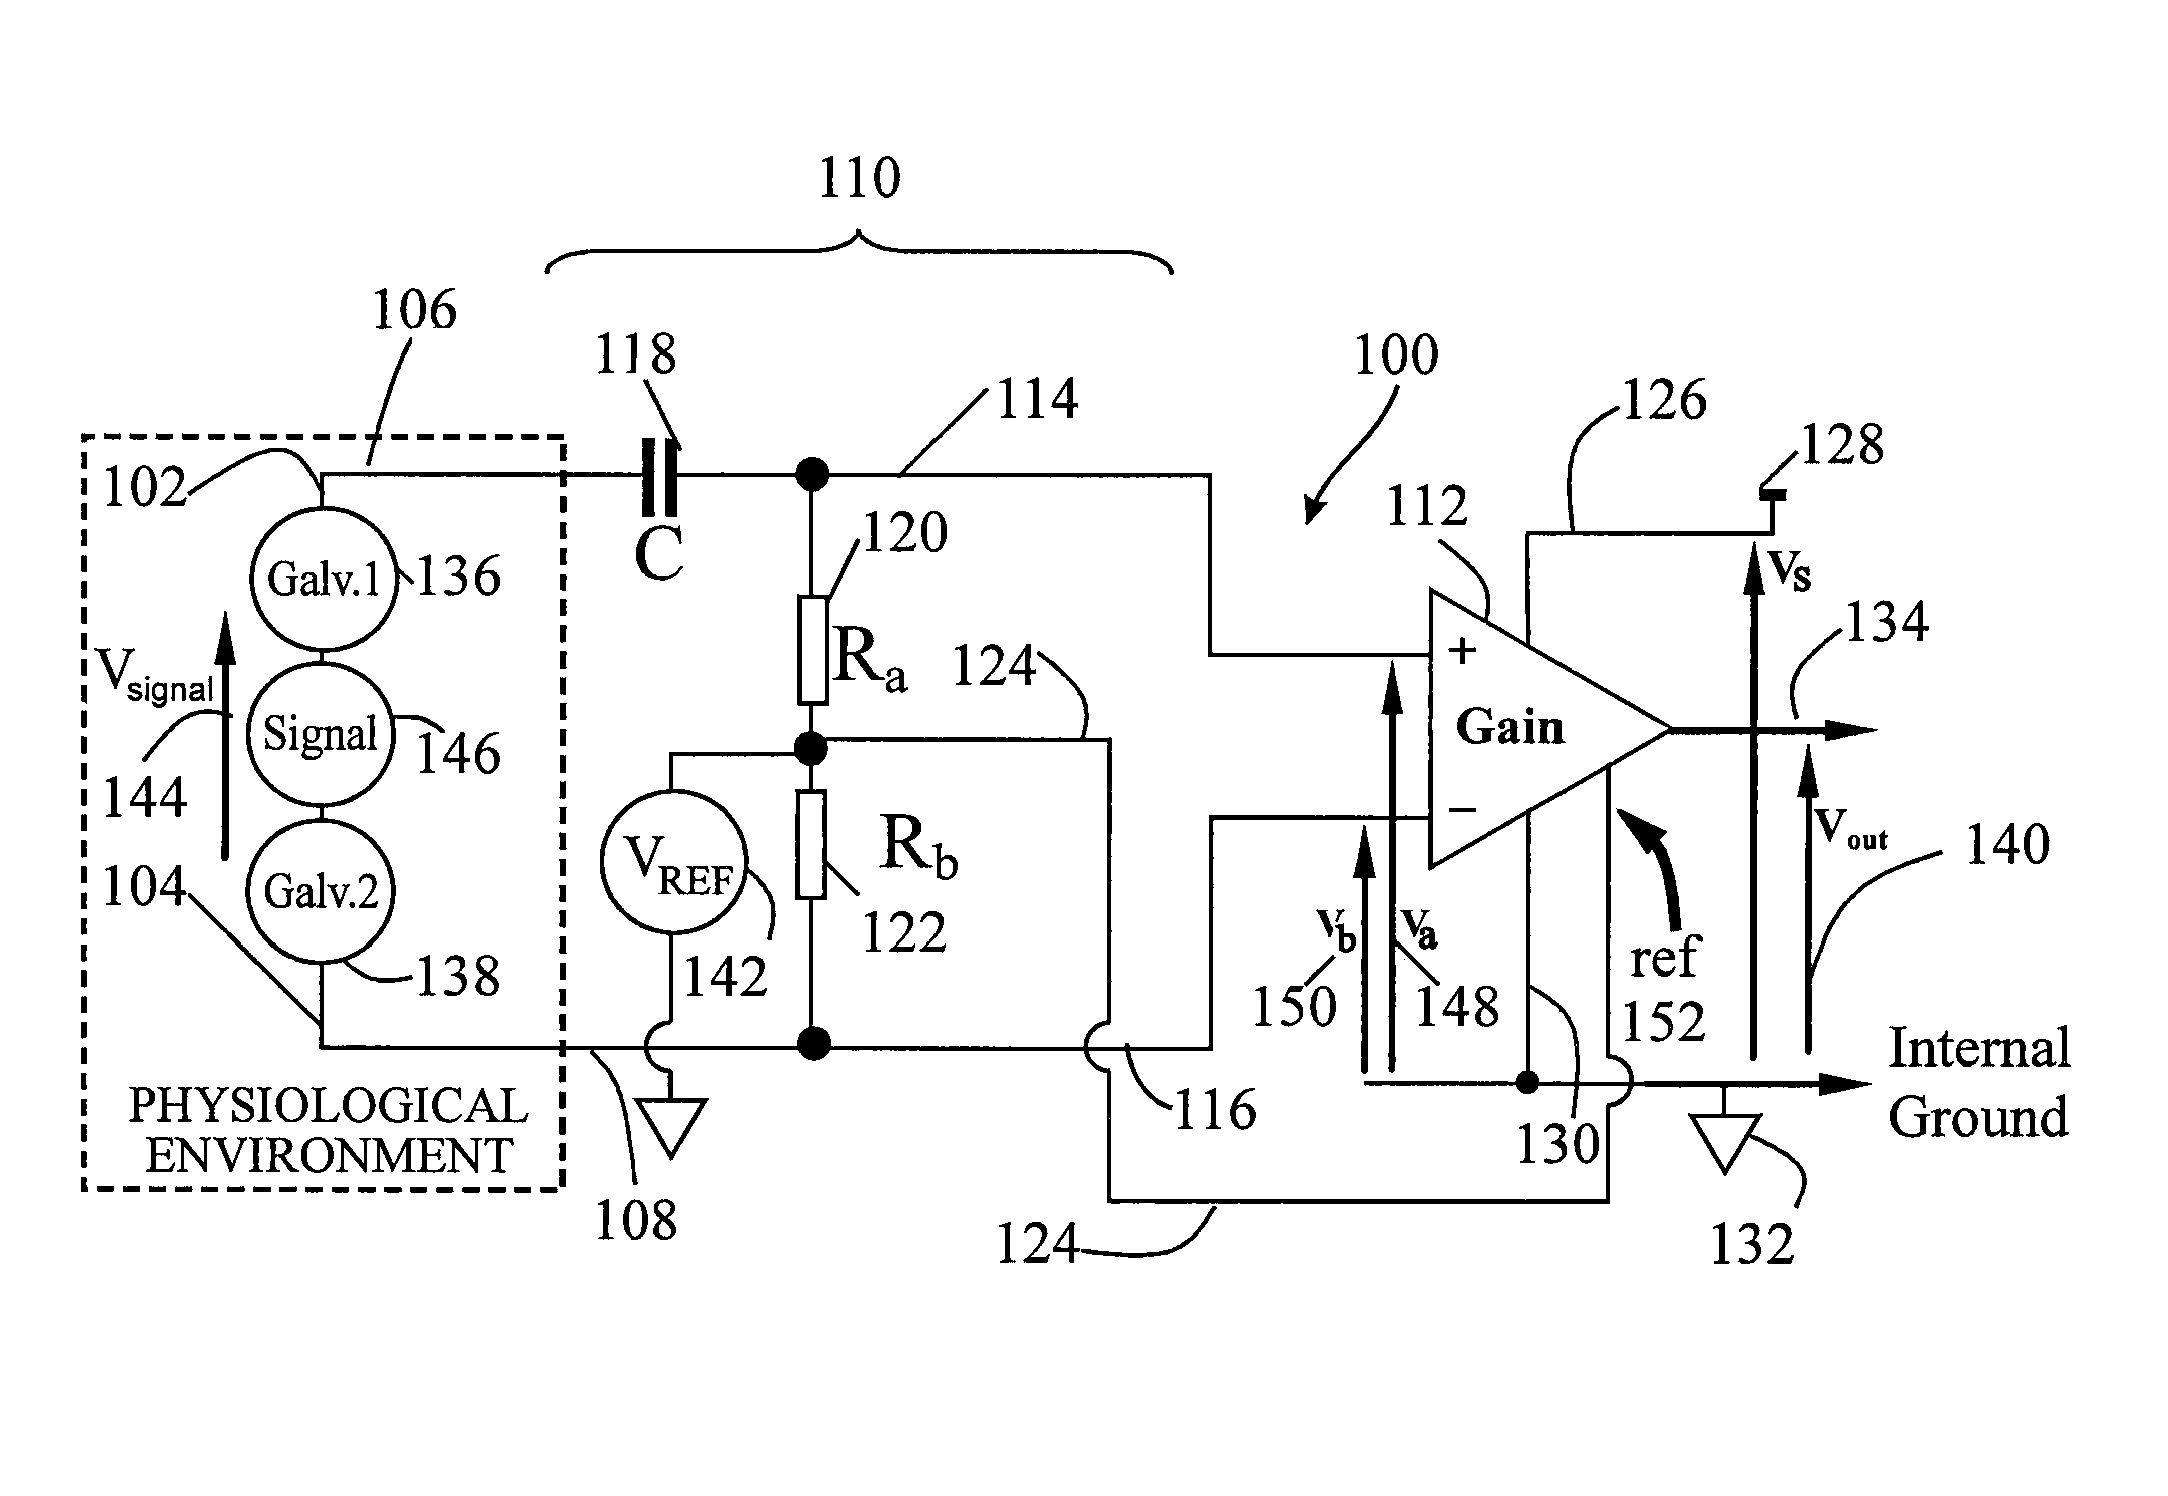 Signal sensing in an implanted apparatus with an internal reference